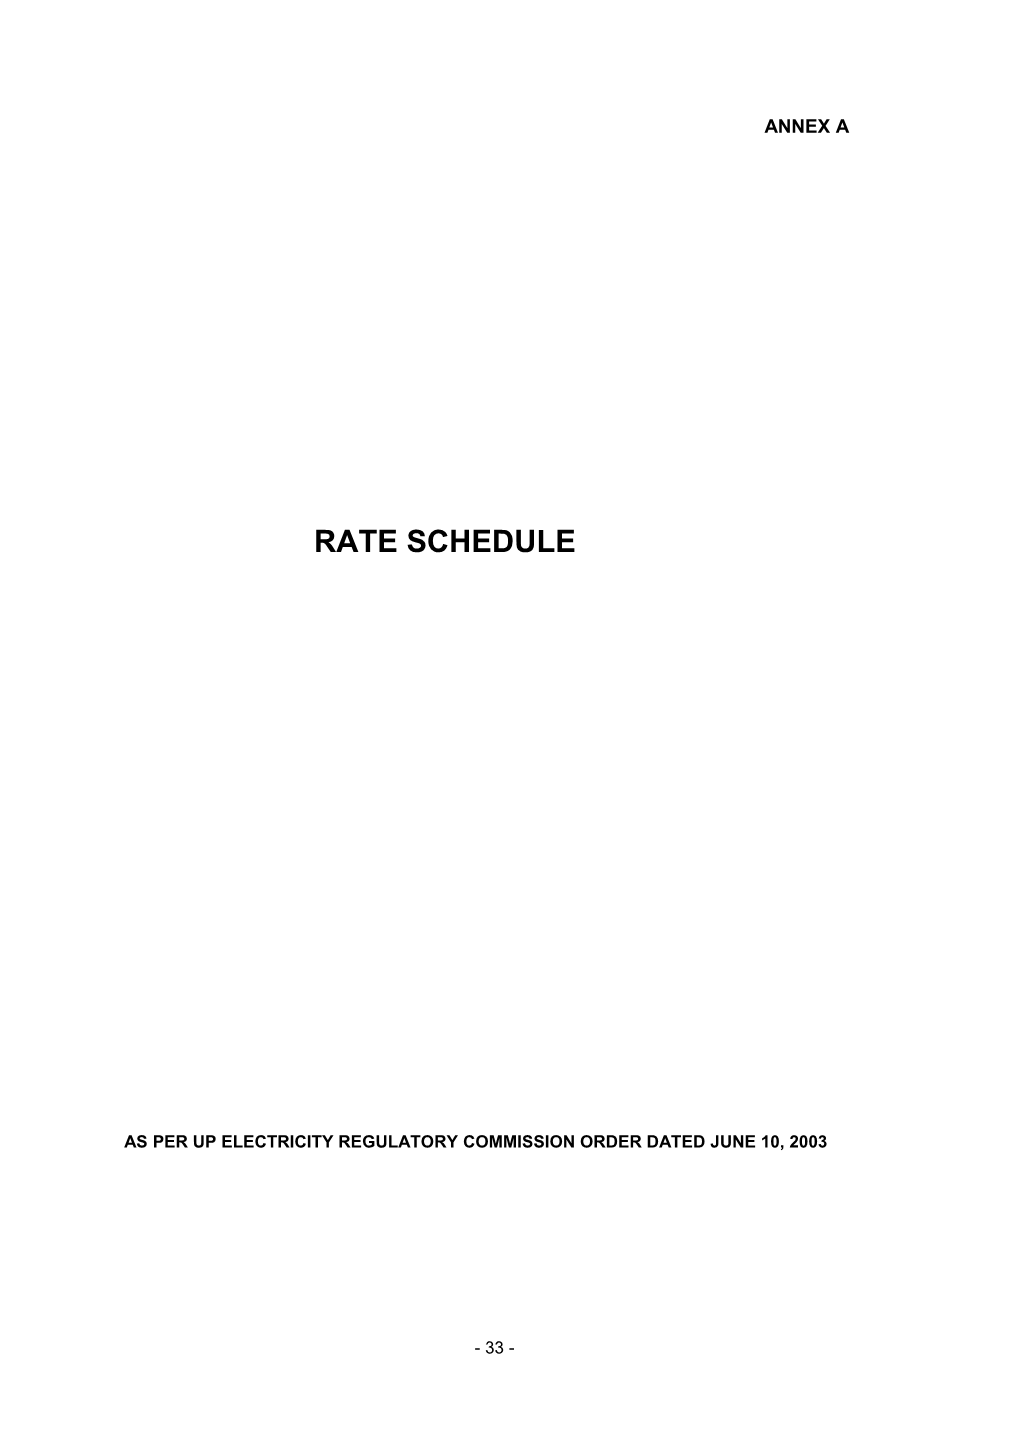 As Per up Electricity Regulatory Commission Order Dated June 10, 2003Rate Schedule LMV 1